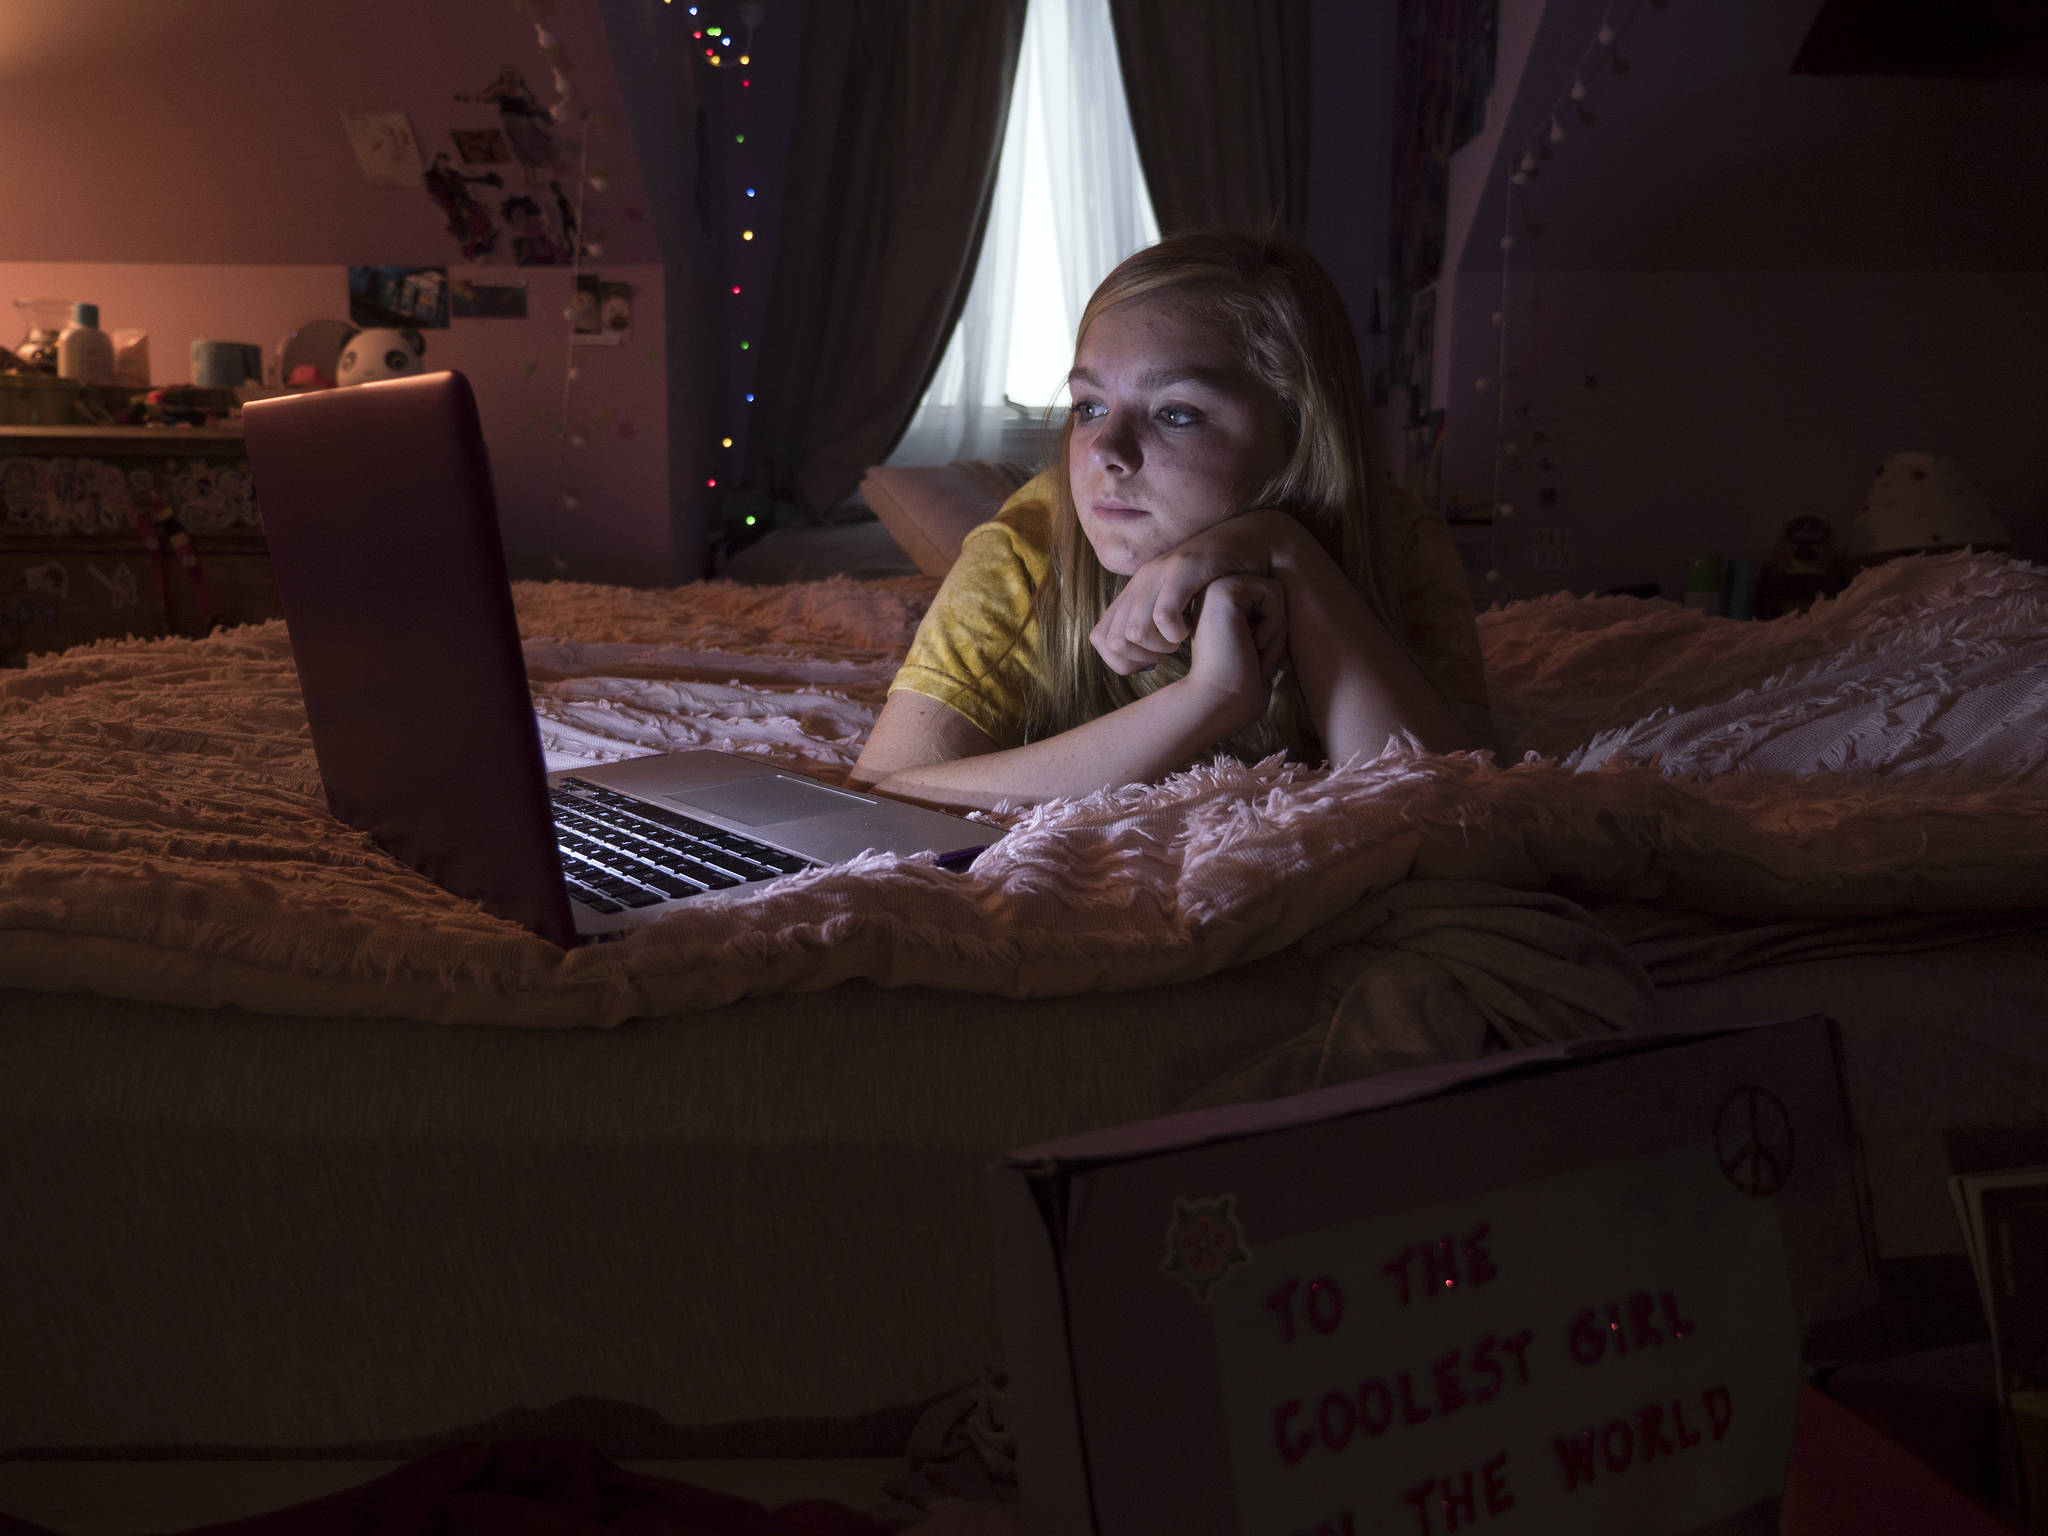 Elsie Fisher stays glued to her screens in ‘Eighth Grade.’ Photo by Linda Kallerus/A24